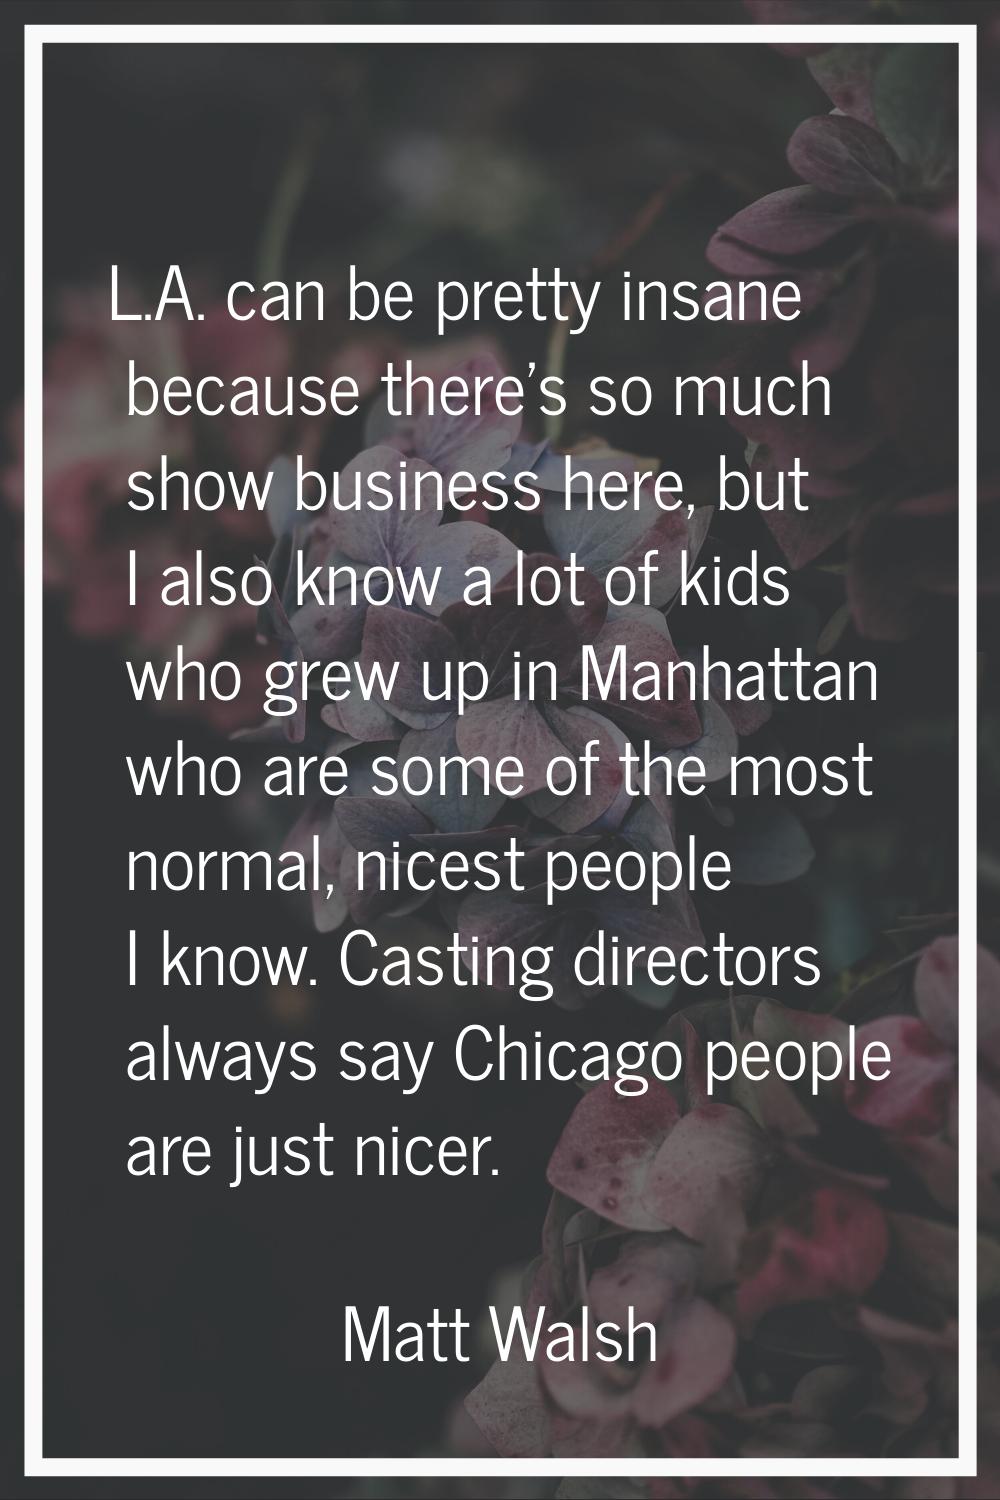 L.A. can be pretty insane because there's so much show business here, but I also know a lot of kids